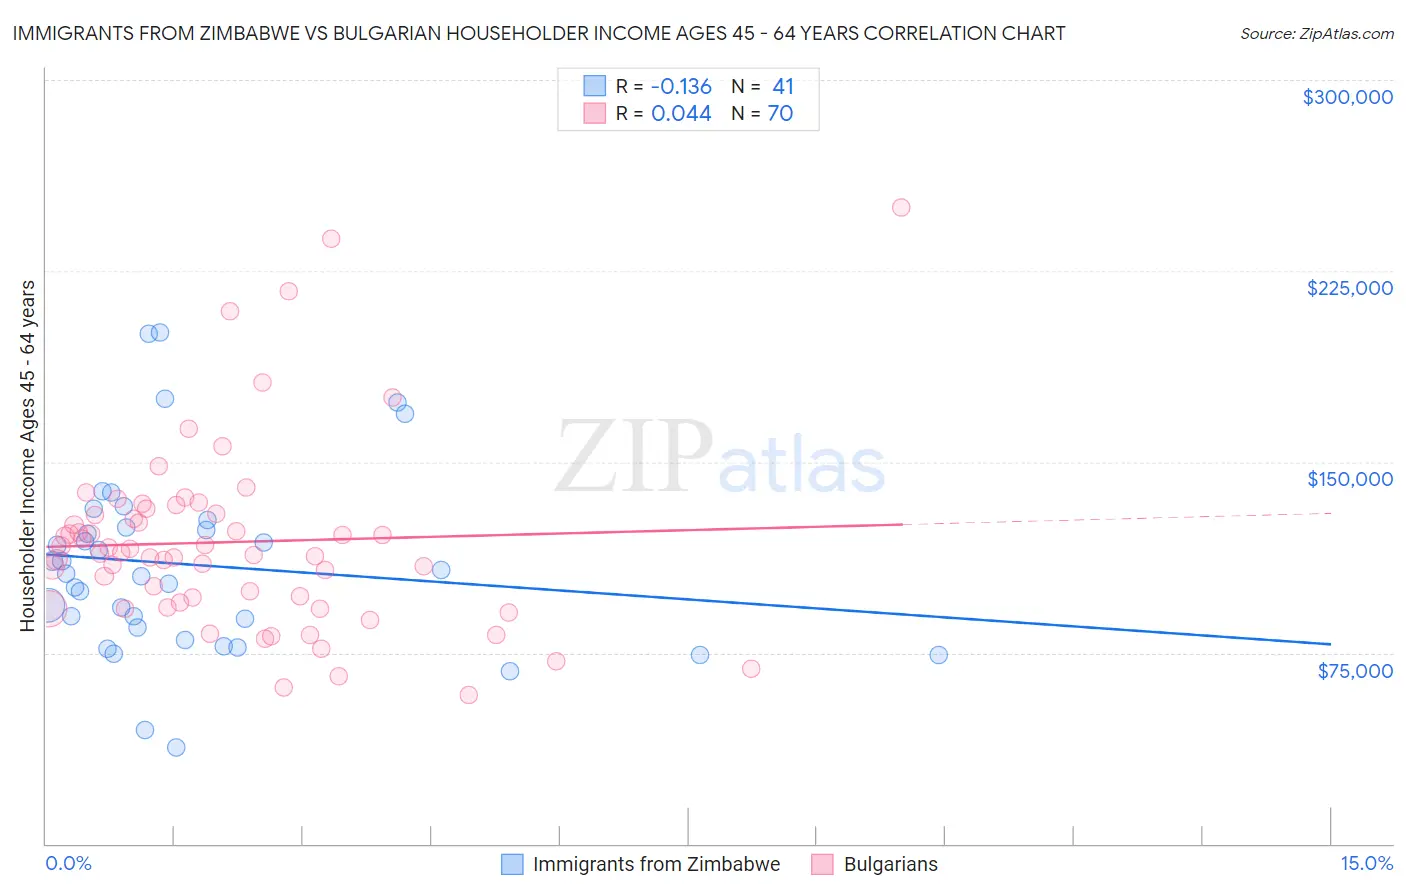 Immigrants from Zimbabwe vs Bulgarian Householder Income Ages 45 - 64 years